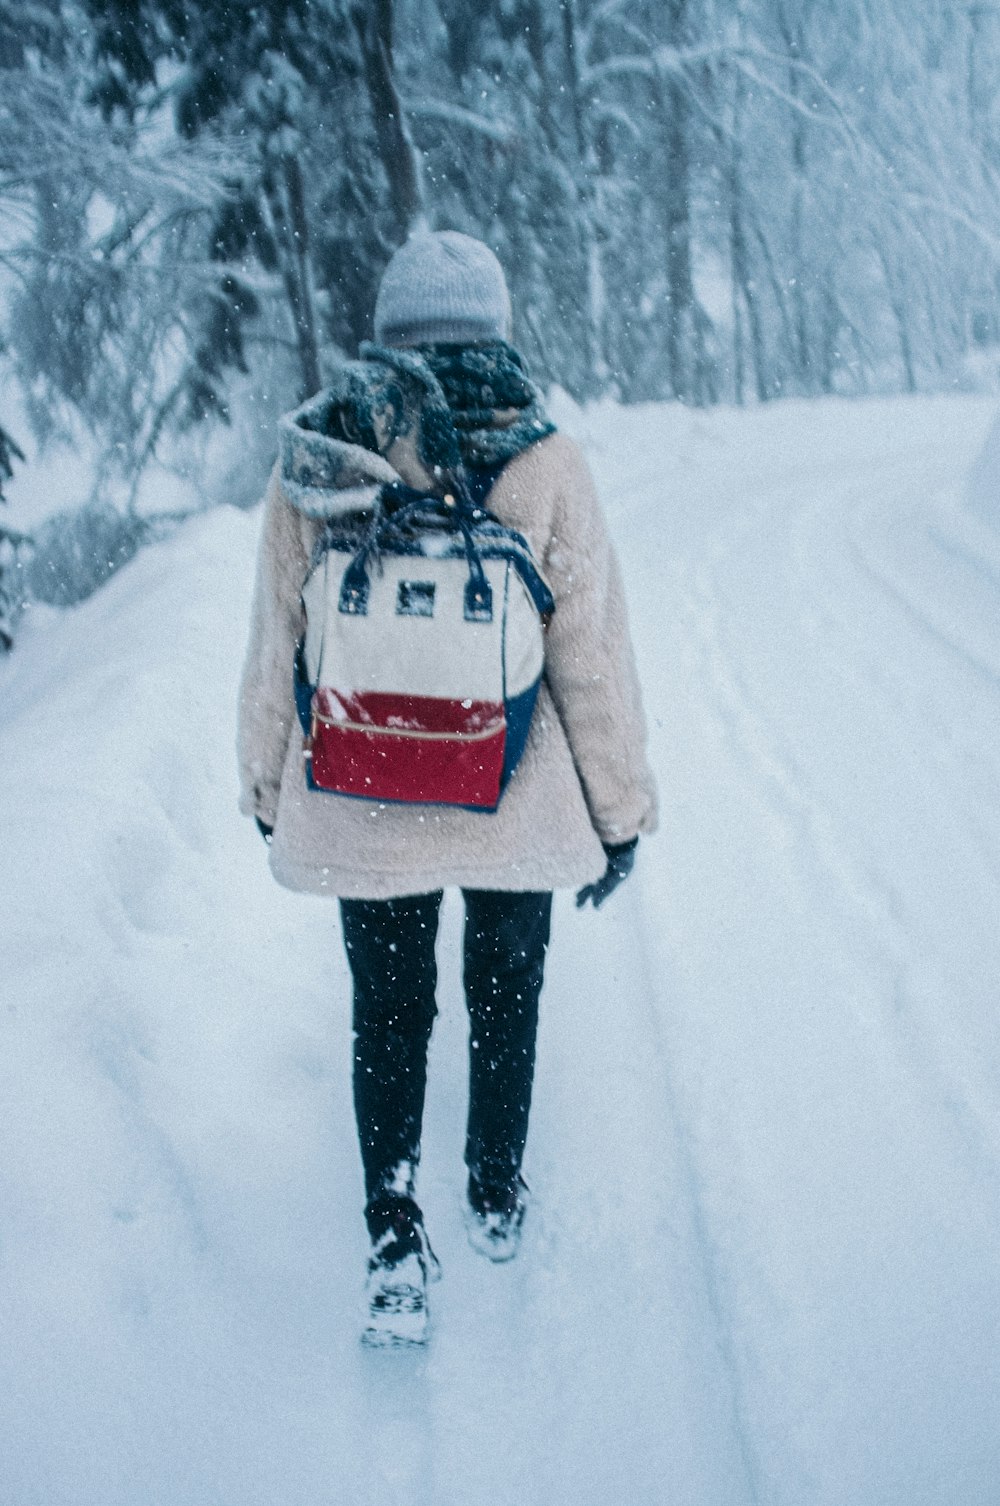 person in gray winter coat carrying red and white backpack walking on snow covered ground during